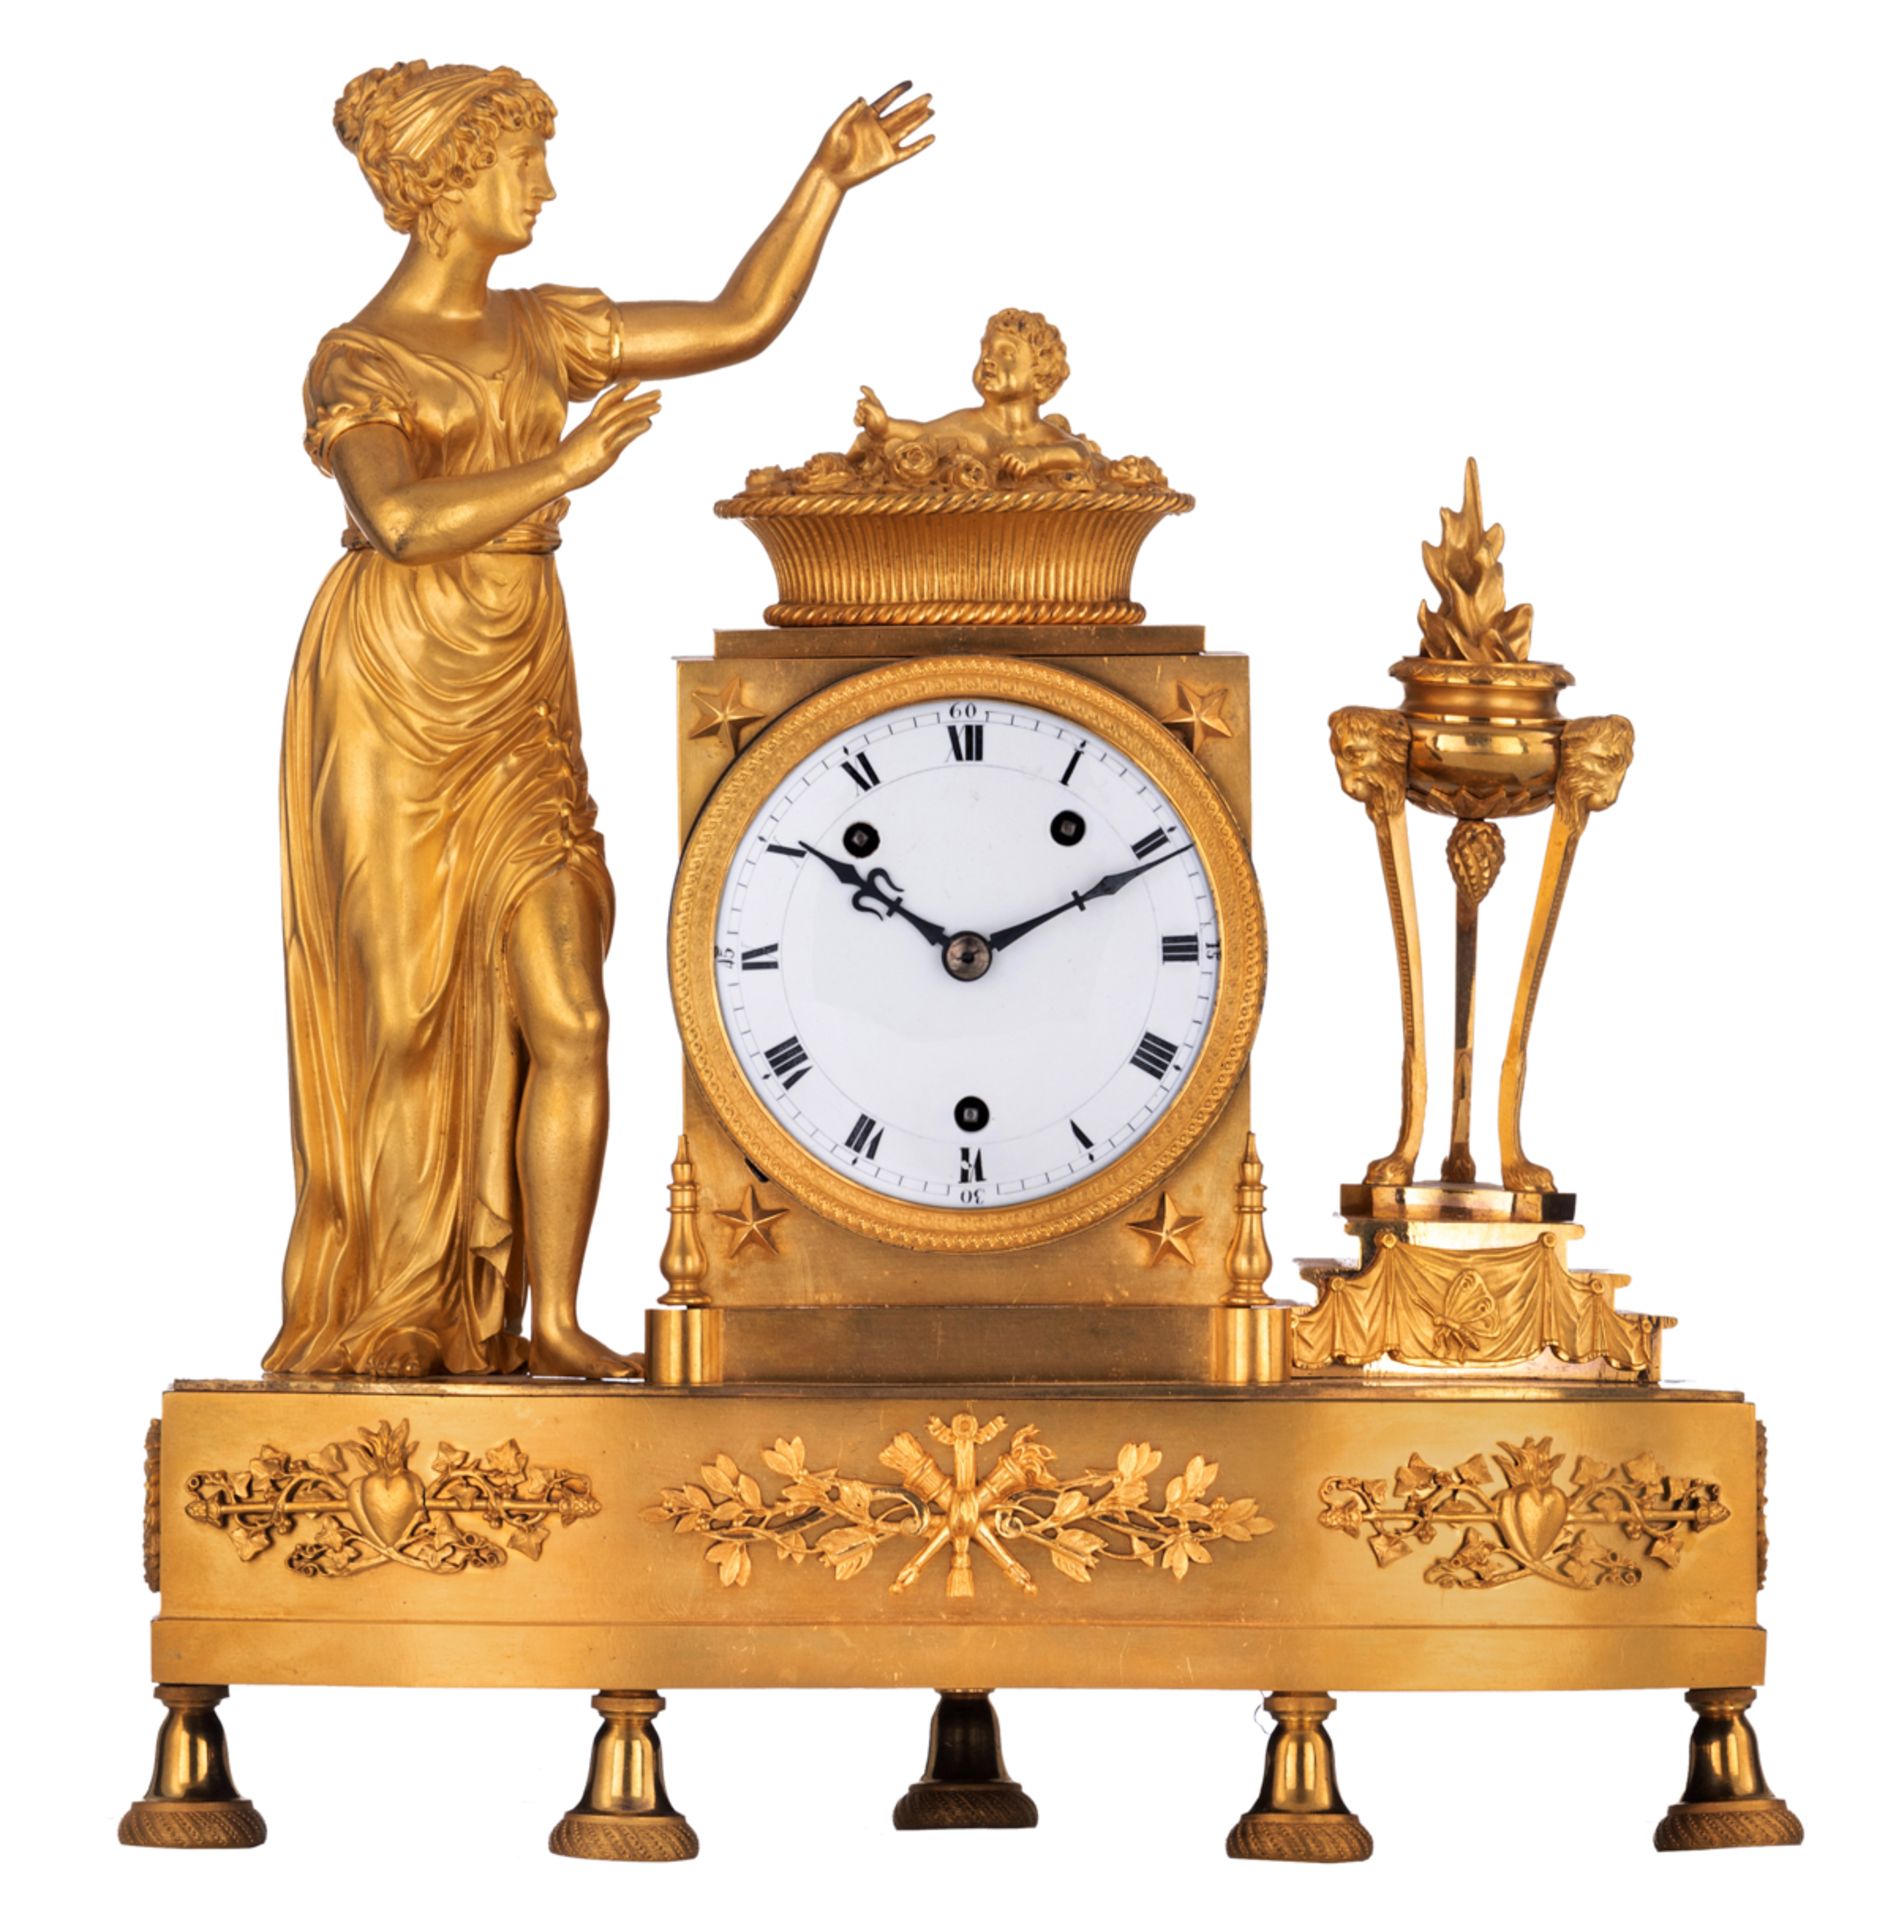 A fine ormolu bronze French Restauration pendulum clock, with on top an allegory on birth, the first